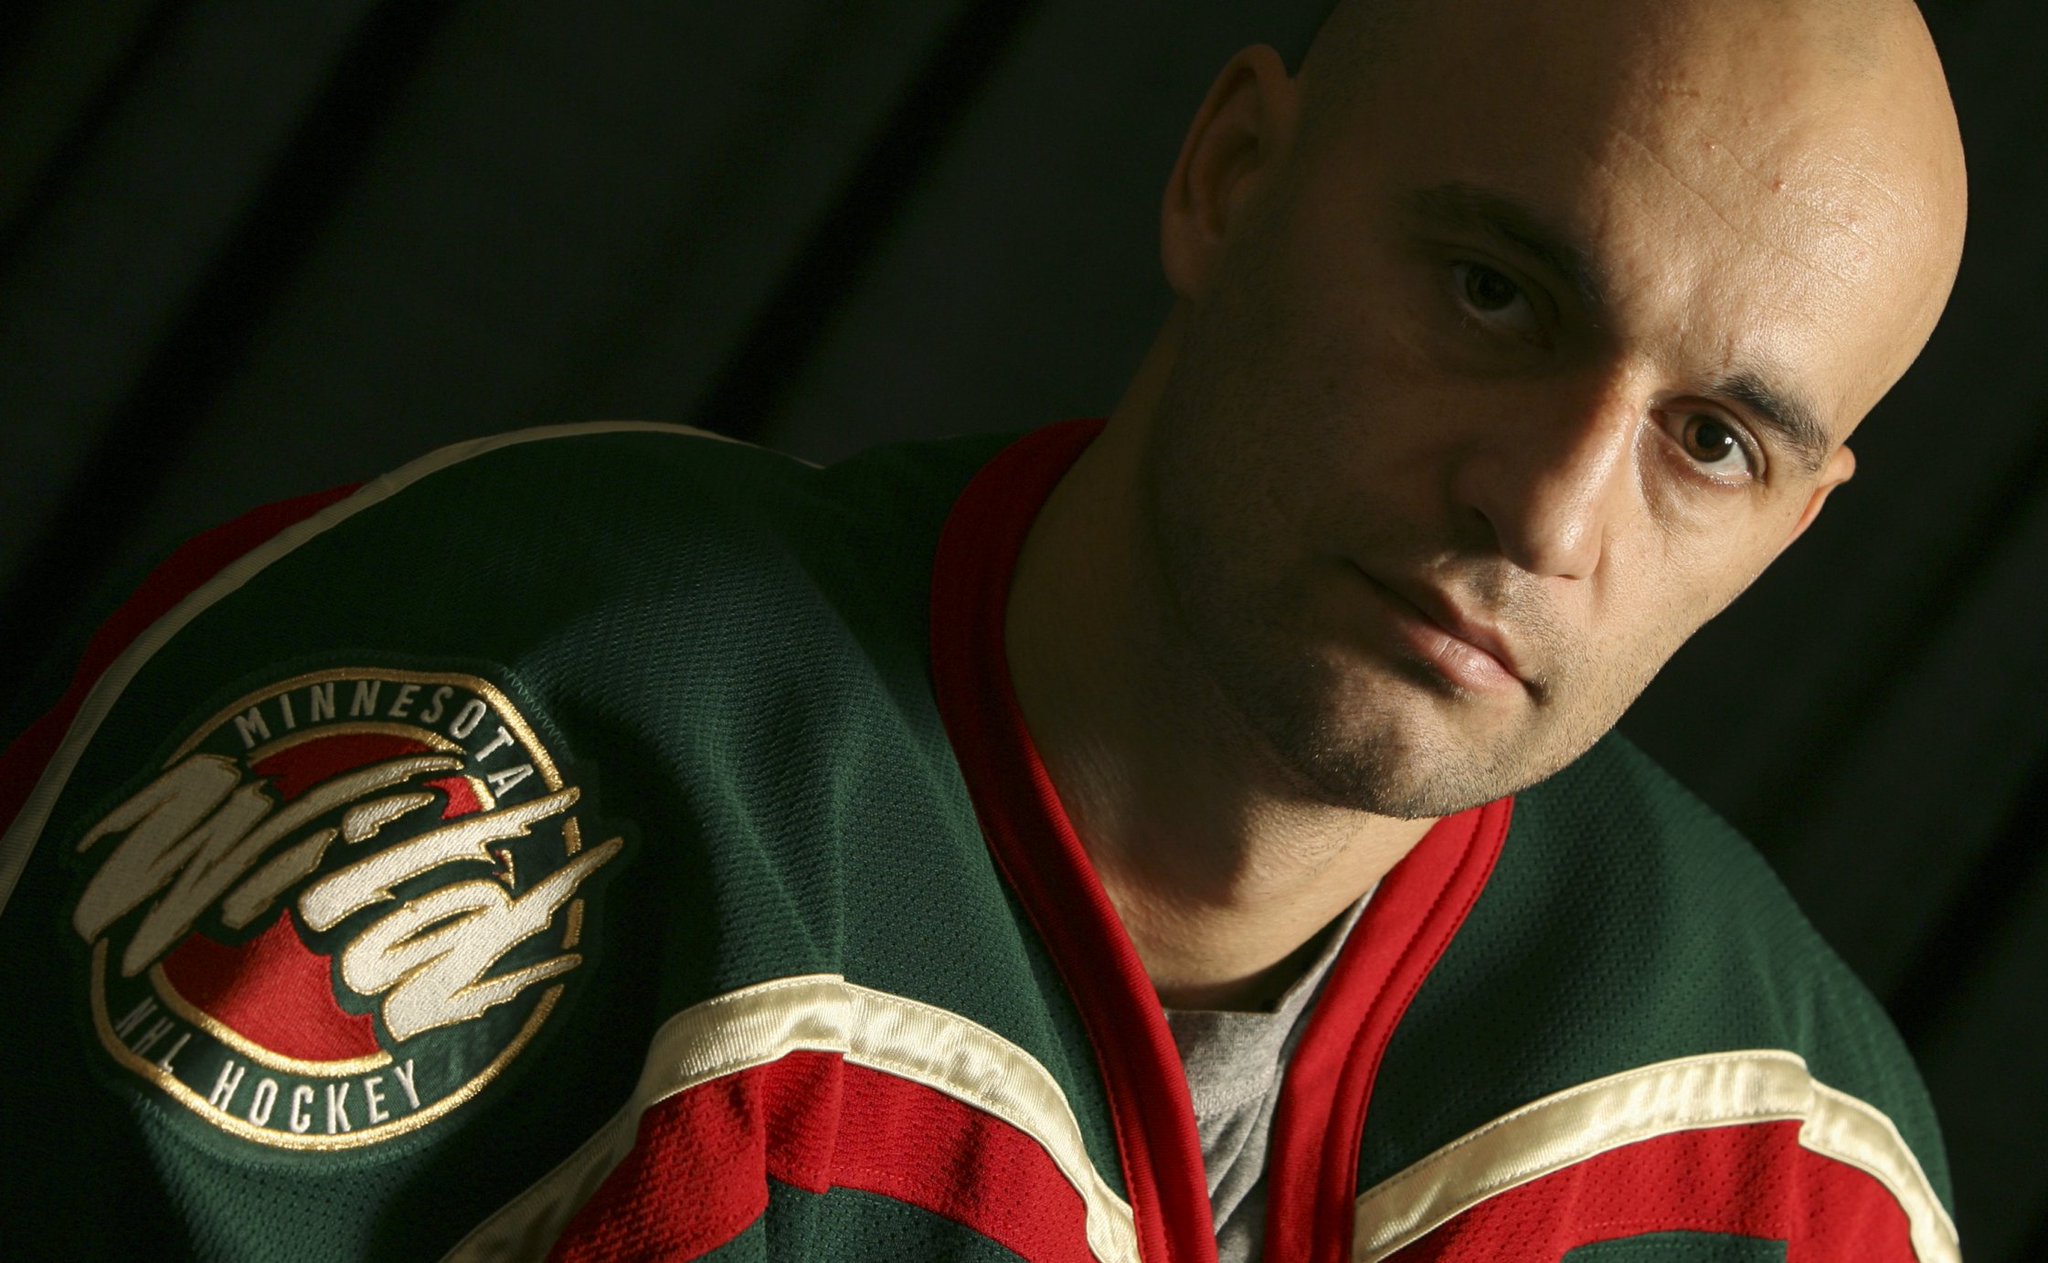 Happy 41st birthday today posthumously to former forward - Pavol Demitra born in Dubnica, Czech. 